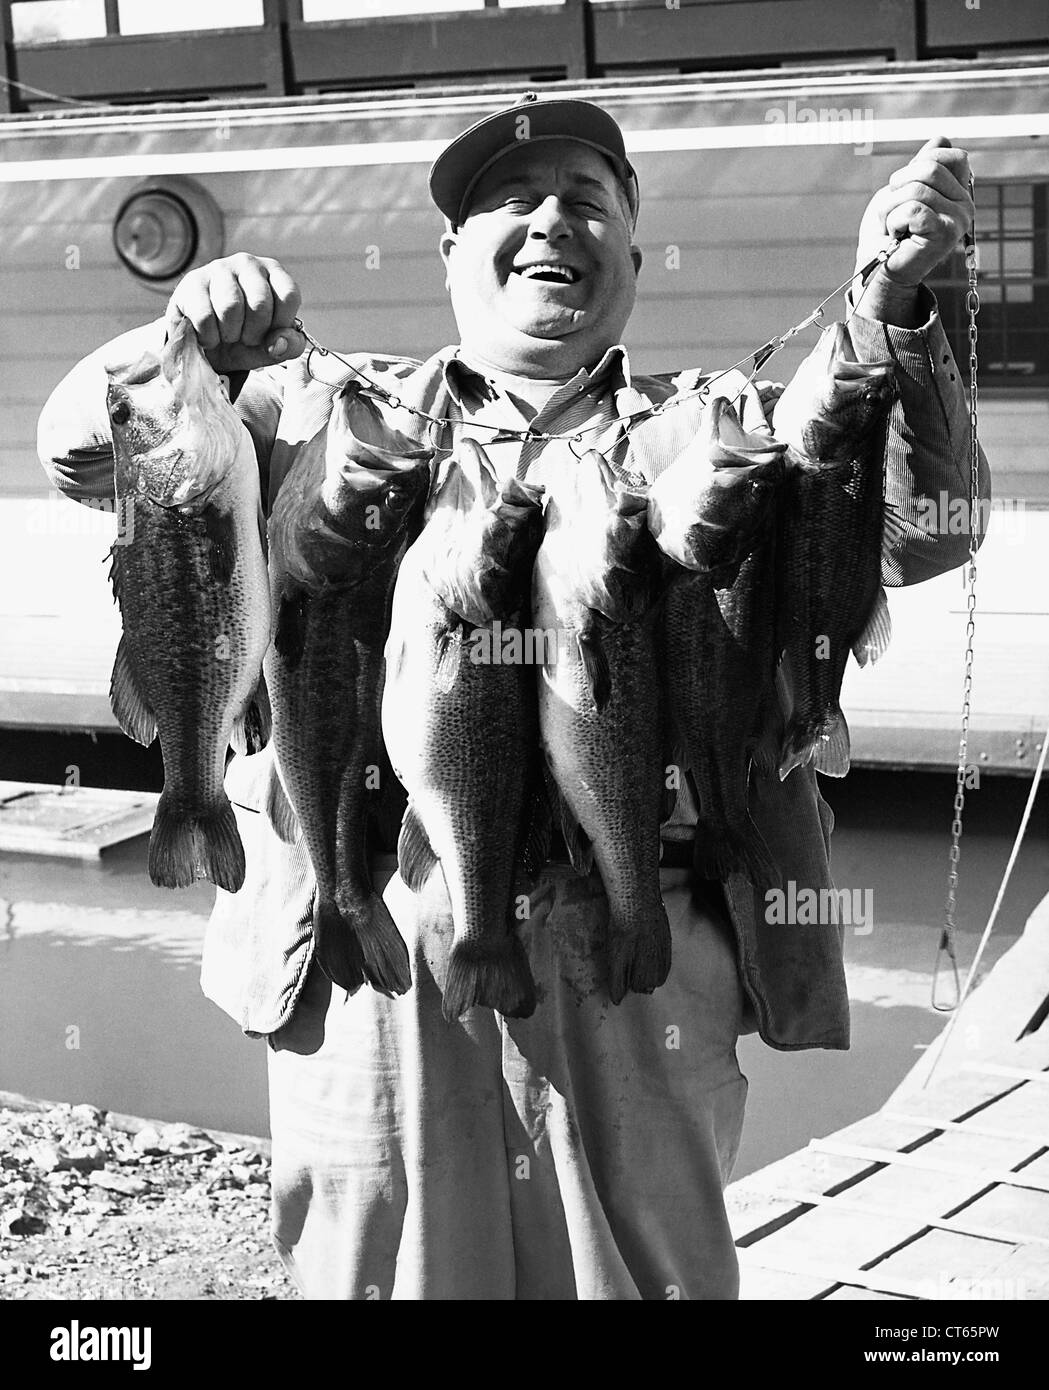 Excited man with fish he caught Stock Photo